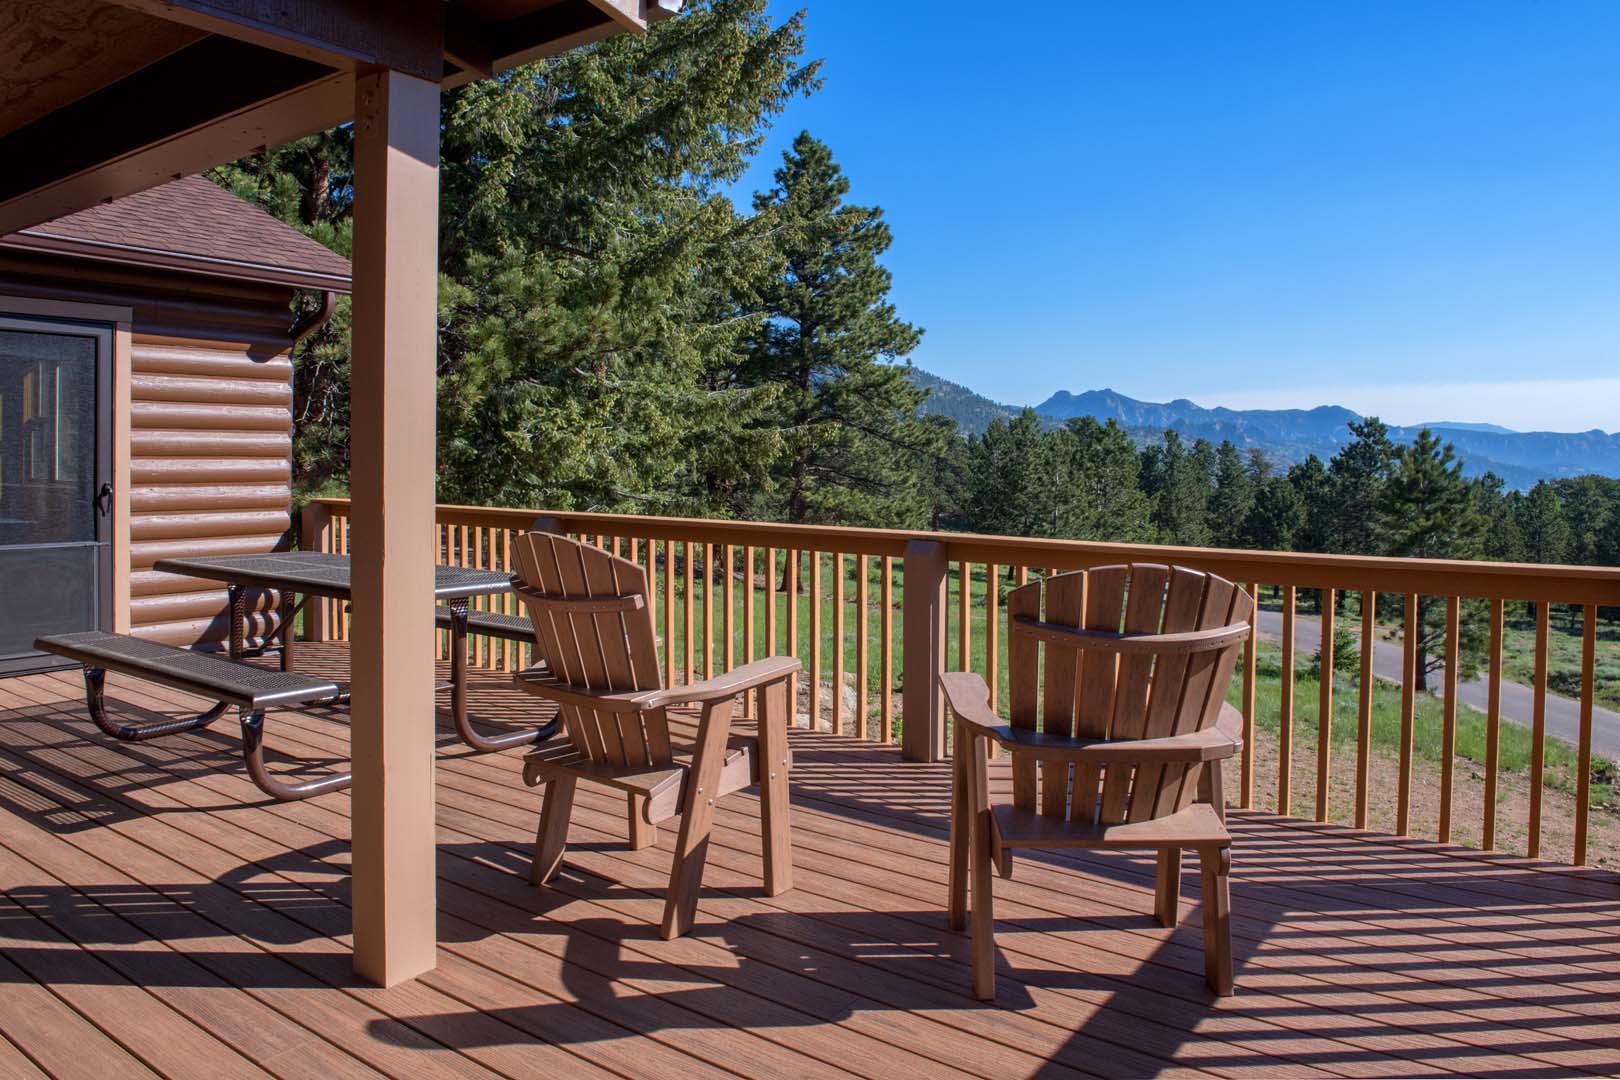 Outdoor patio with chairs overlooking the mountains